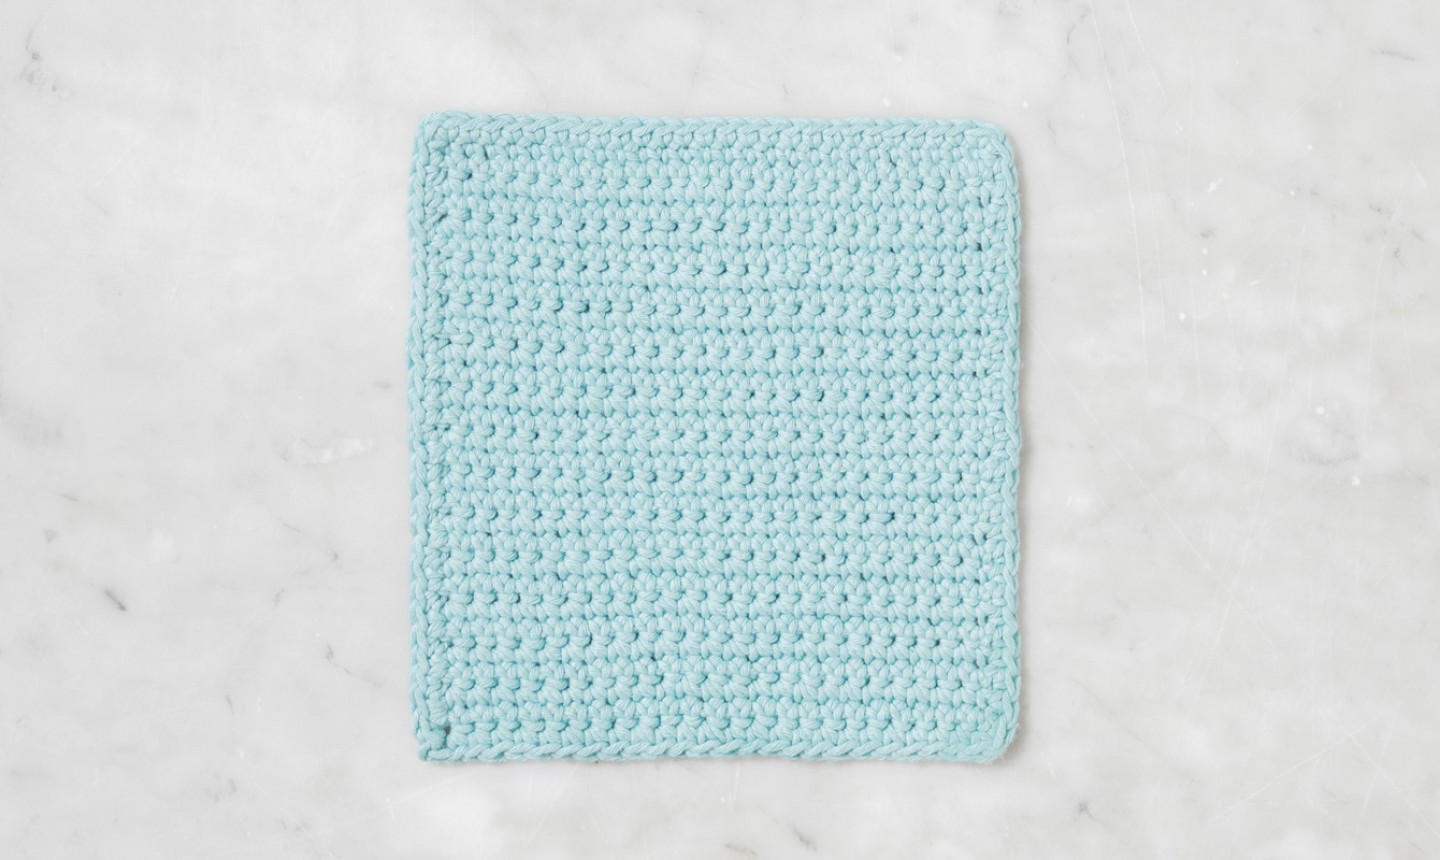 Light blue square of completed crochet